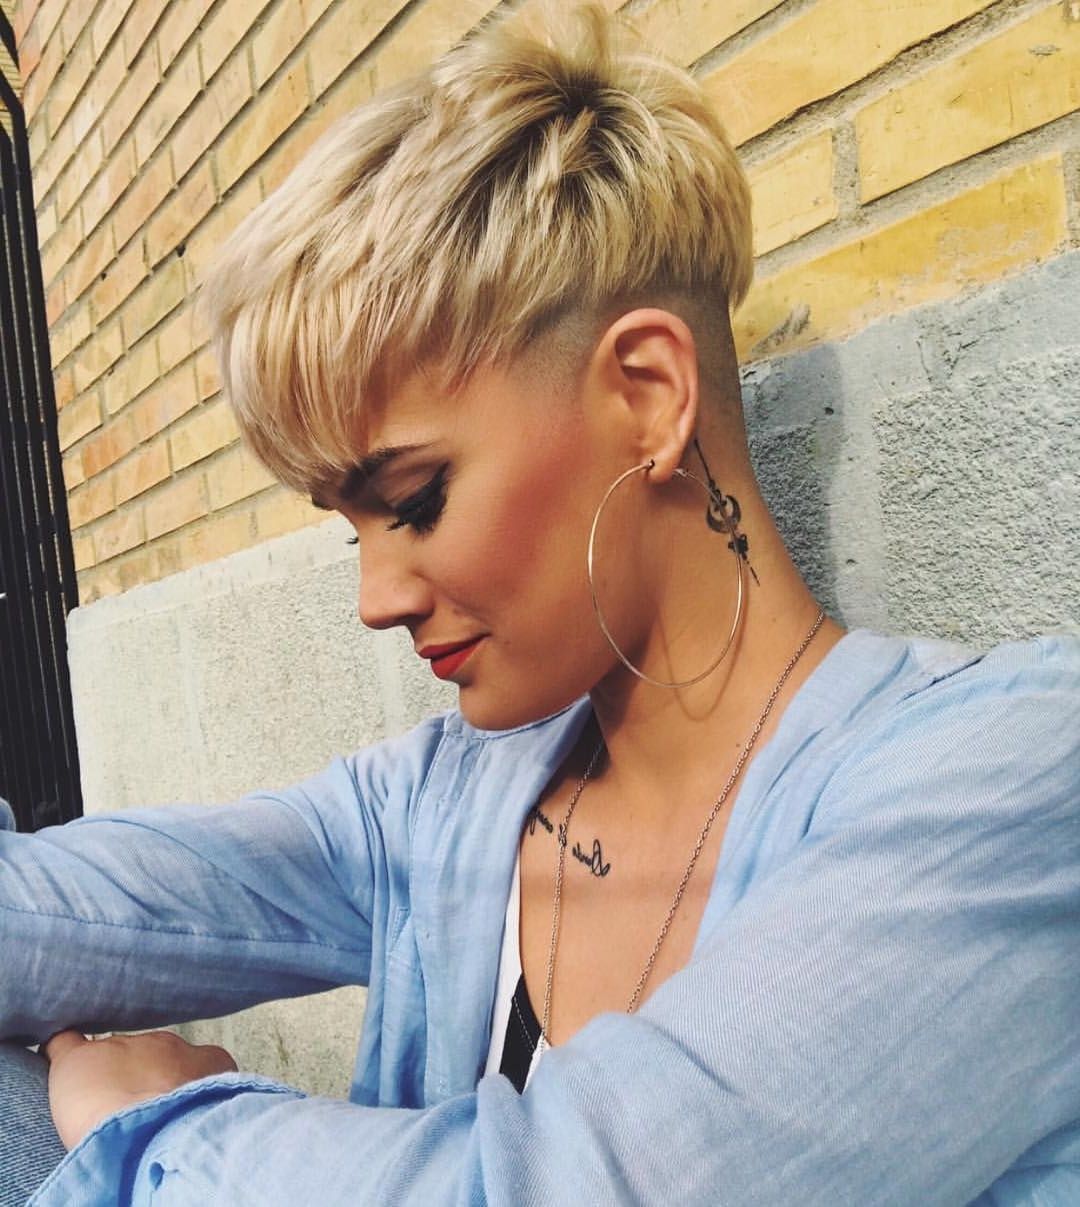 Best And Newest Undercut Blonde Pixie Hairstyles With Dark Roots In 10 Stylish Pixie Haircuts – Women Short Undercut Hairstyles 2018 – 2019 (Gallery 19 of 20)